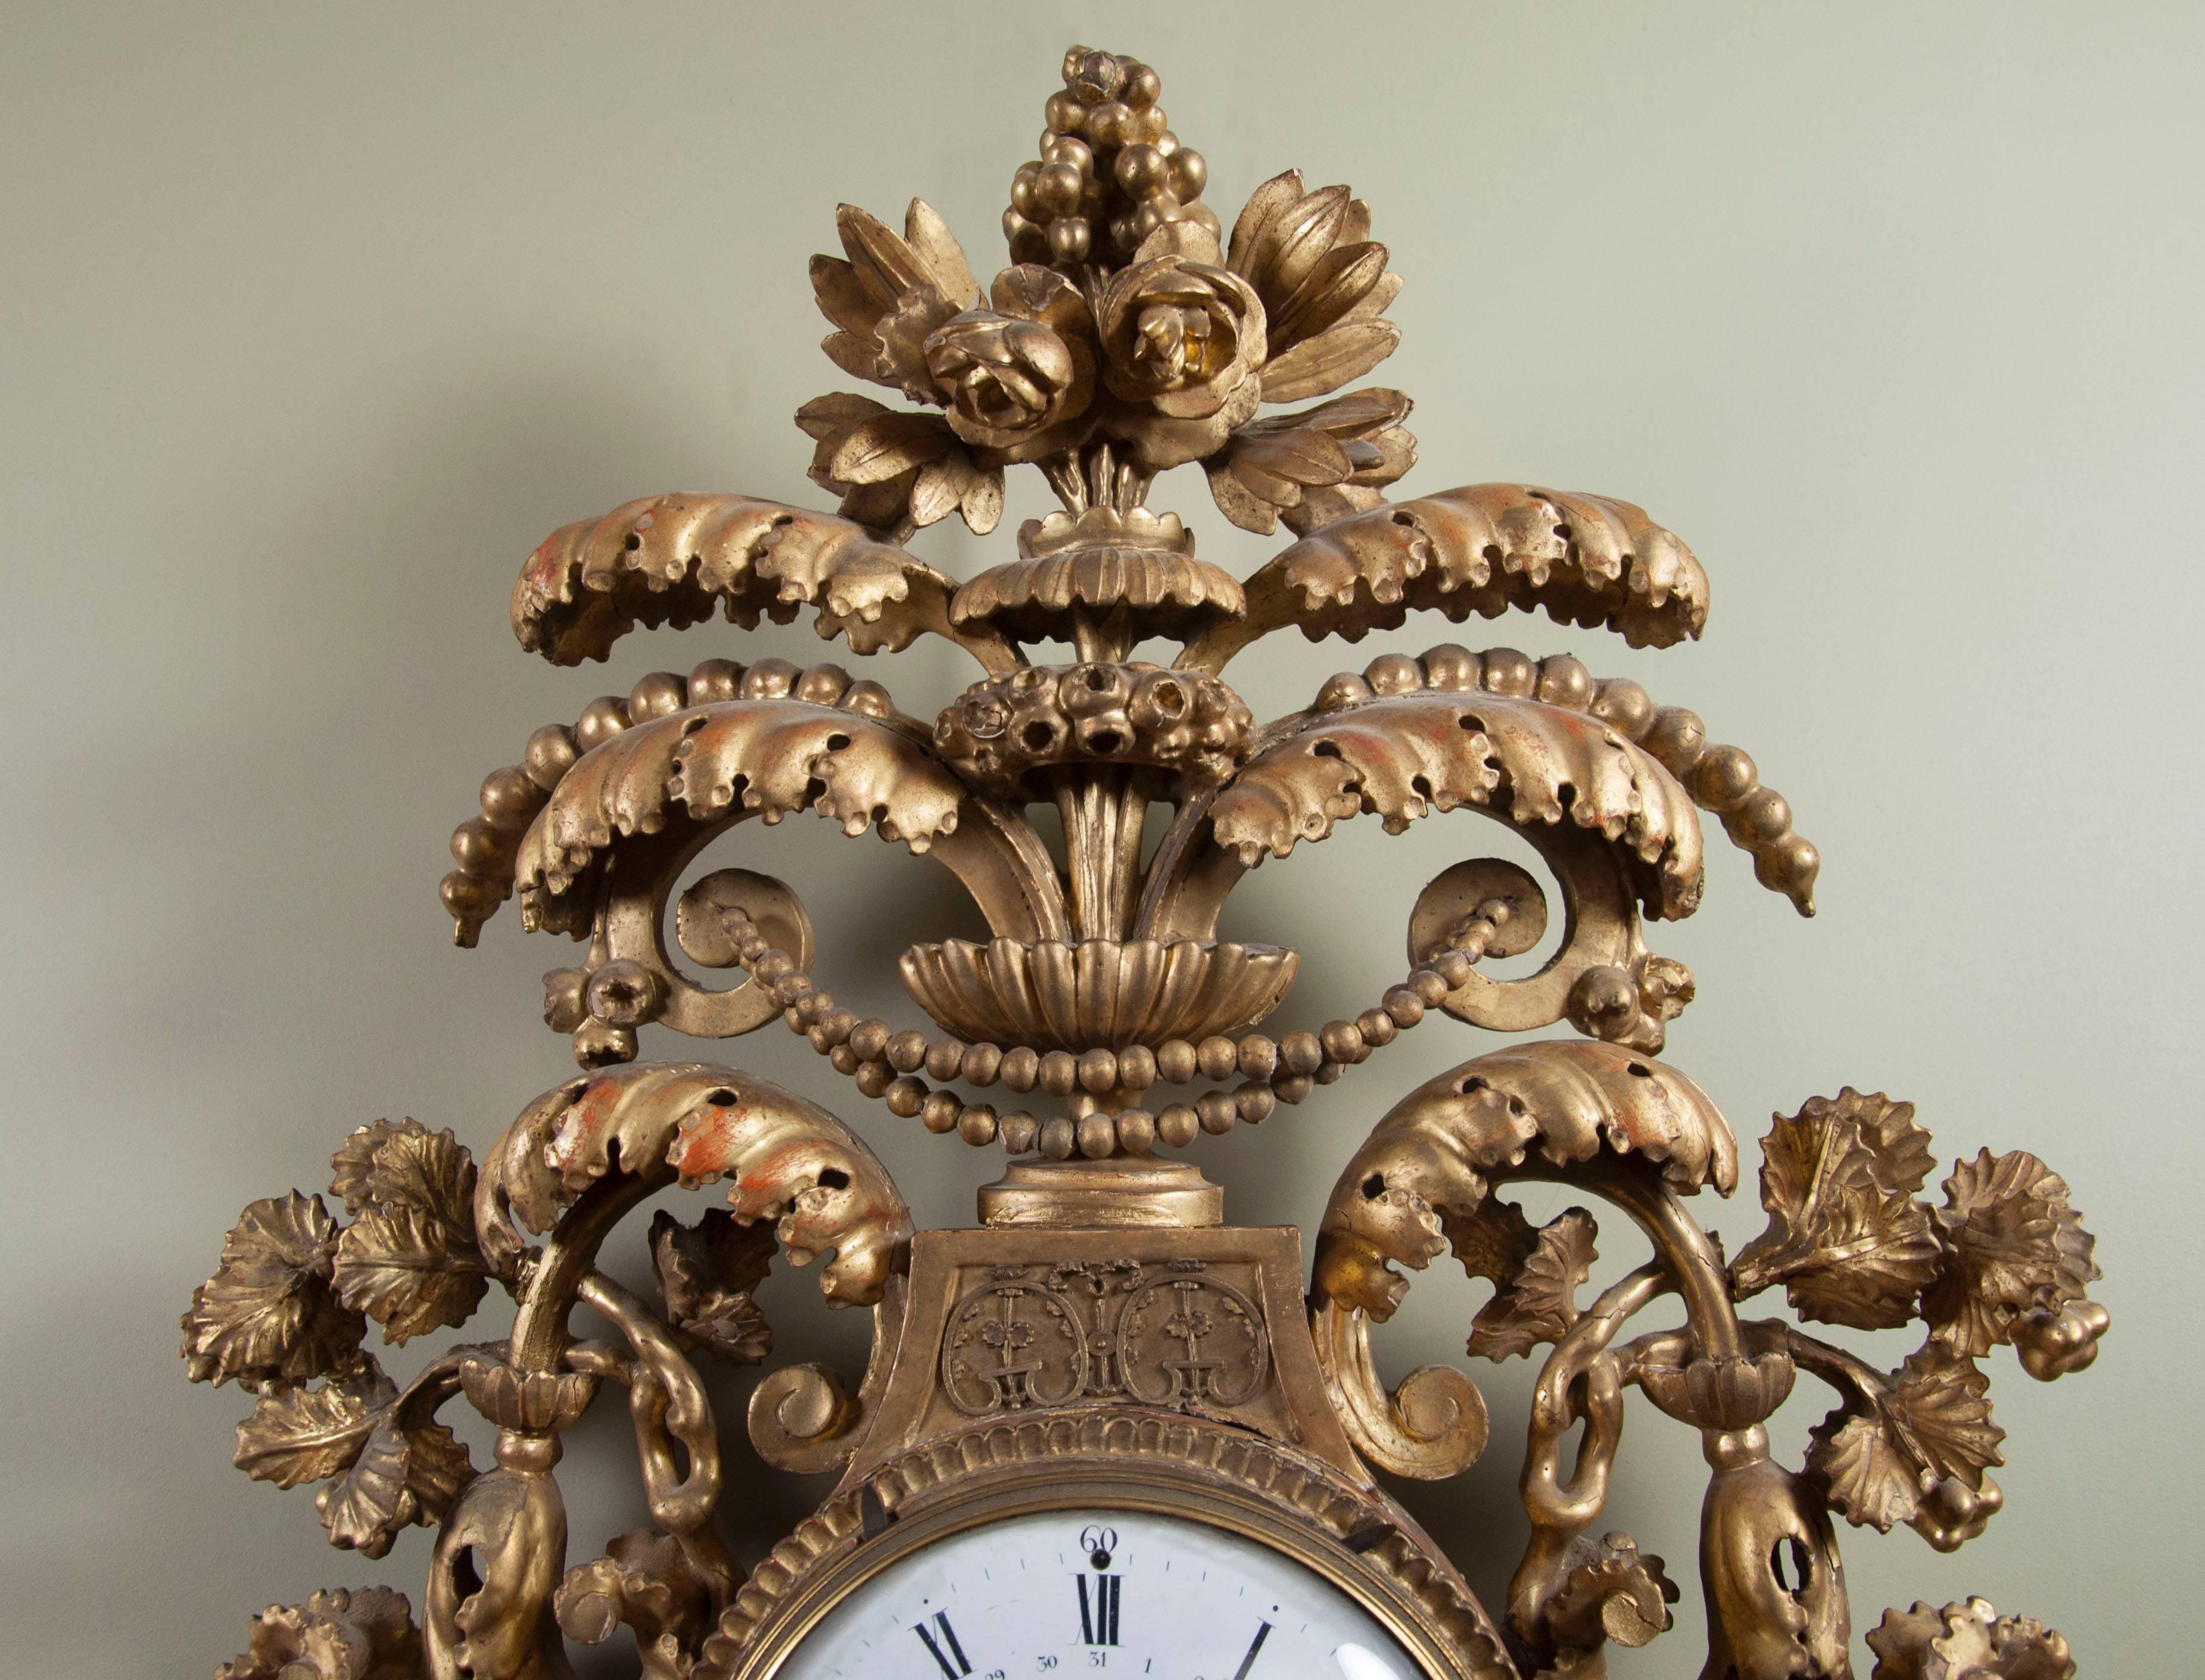 With urn superstructure with branches and flowing leaves and flowers , enamelled clock face  flanked by flowers and leaves over a section where the pendulum hangs flanked by mythological birds with lower leaves and berry cluster. Original works.